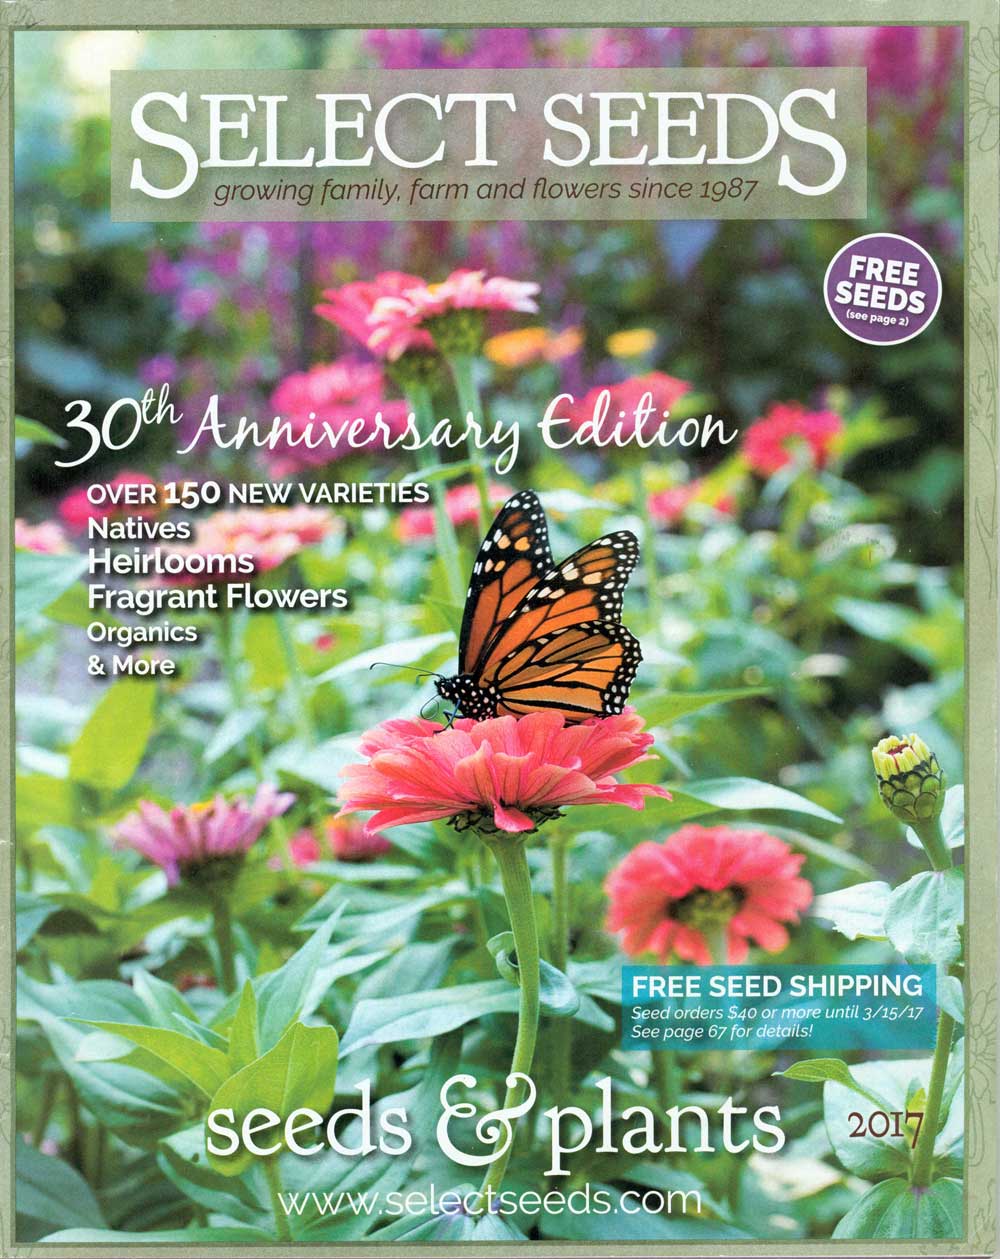 Select Seeds, Connecticut, 8 x 10 in., 68 pp.